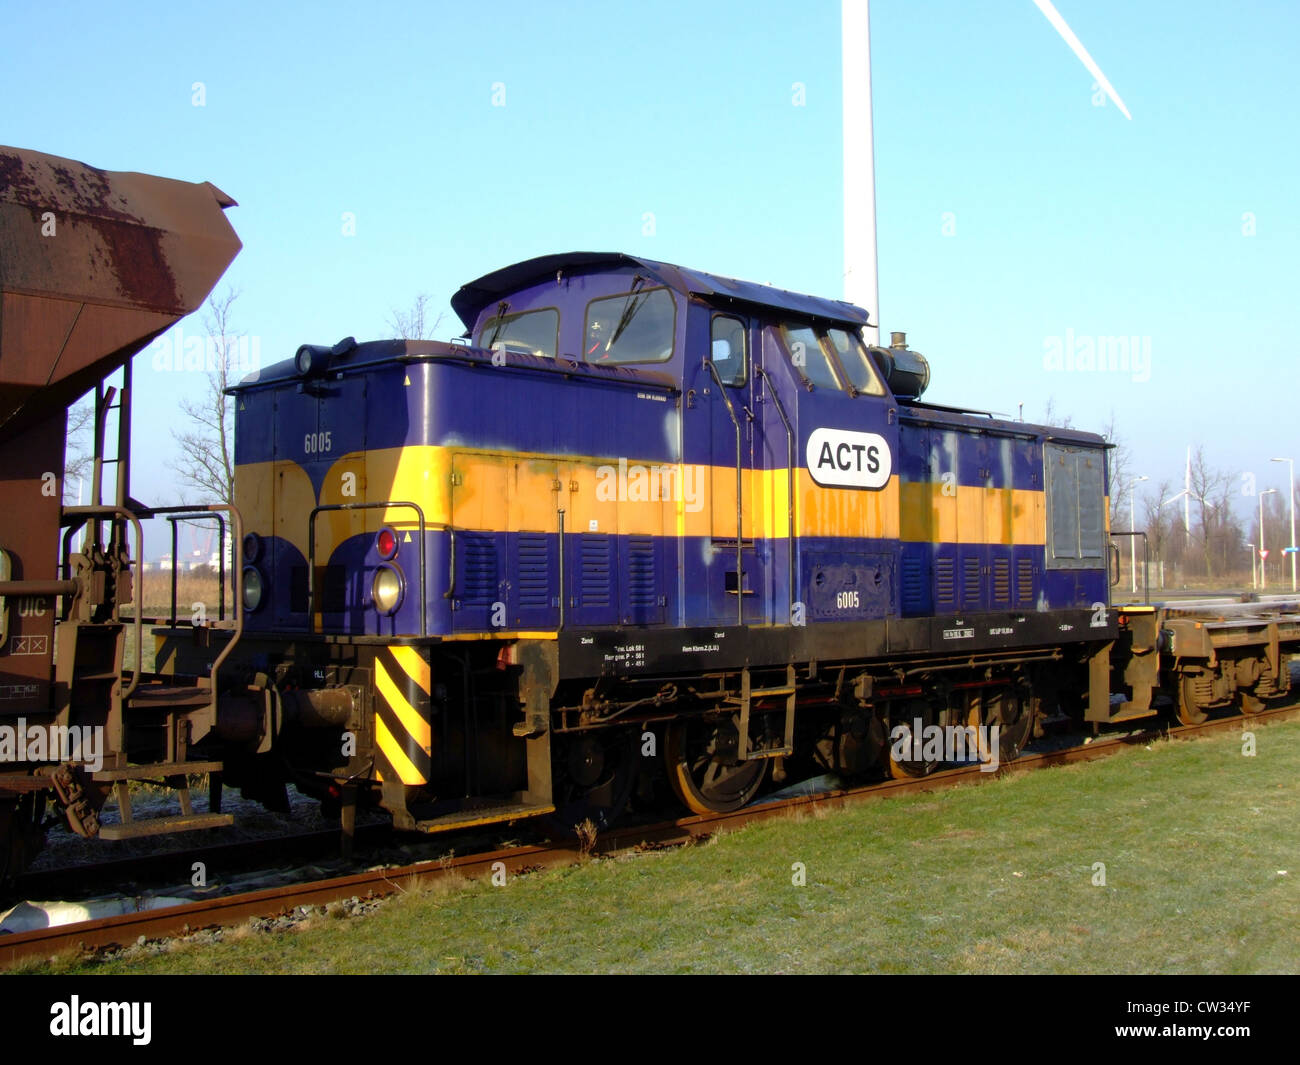 ACTS 6005 (Afzet Container Transport Systeem) at Amsterdam. Stock Photo